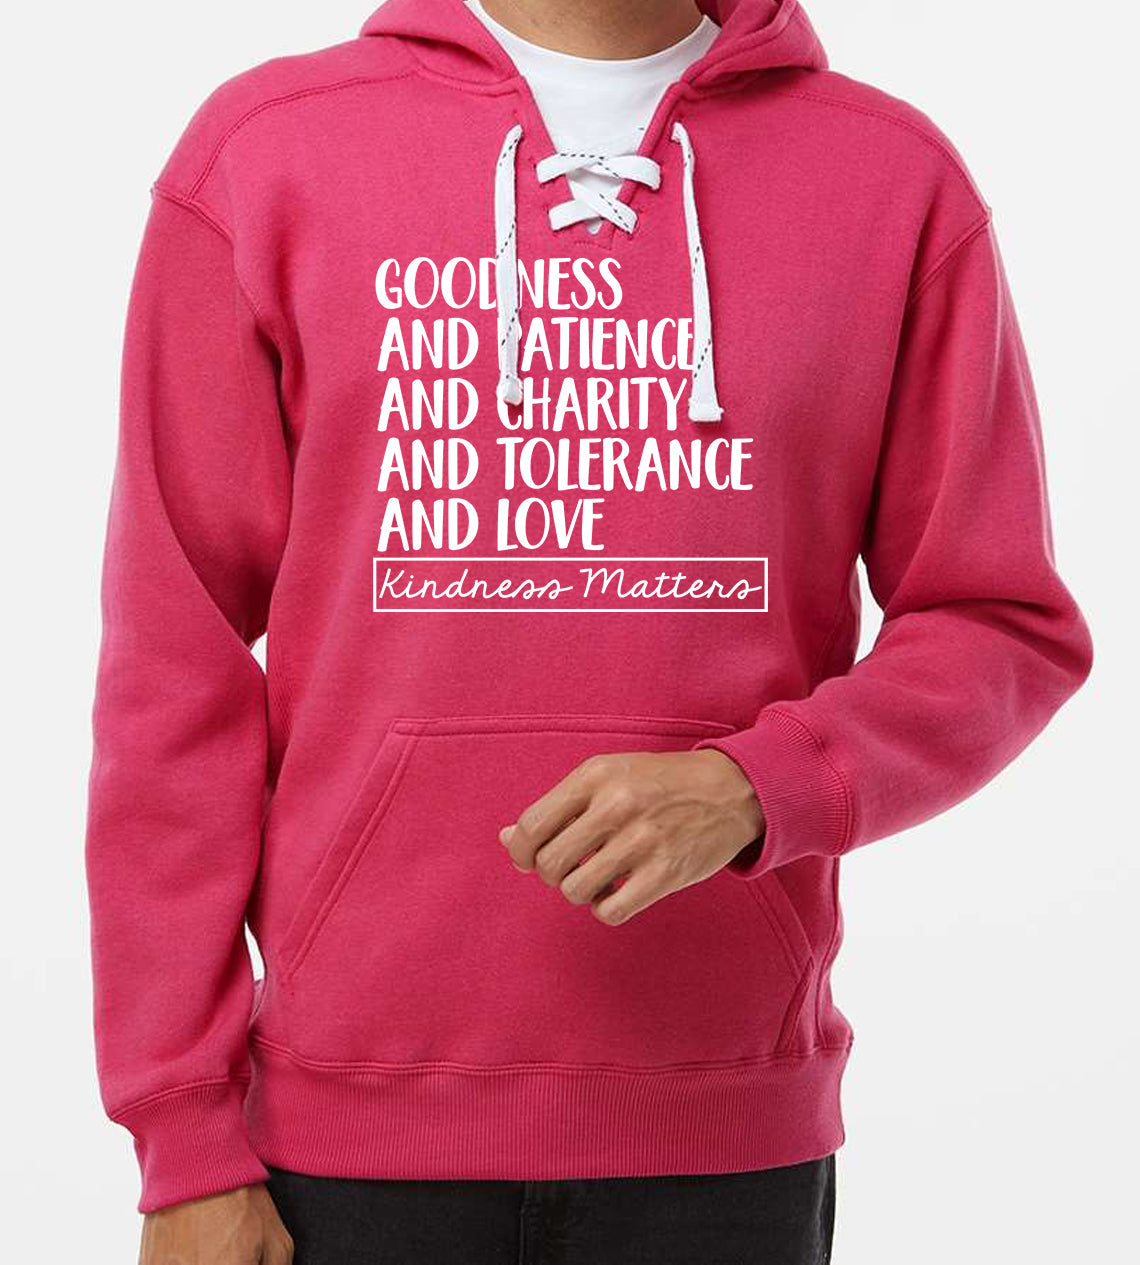 Goodness And Patience Charity Tolerance Love Kindness Matters Graphic Tee Graphic Tee